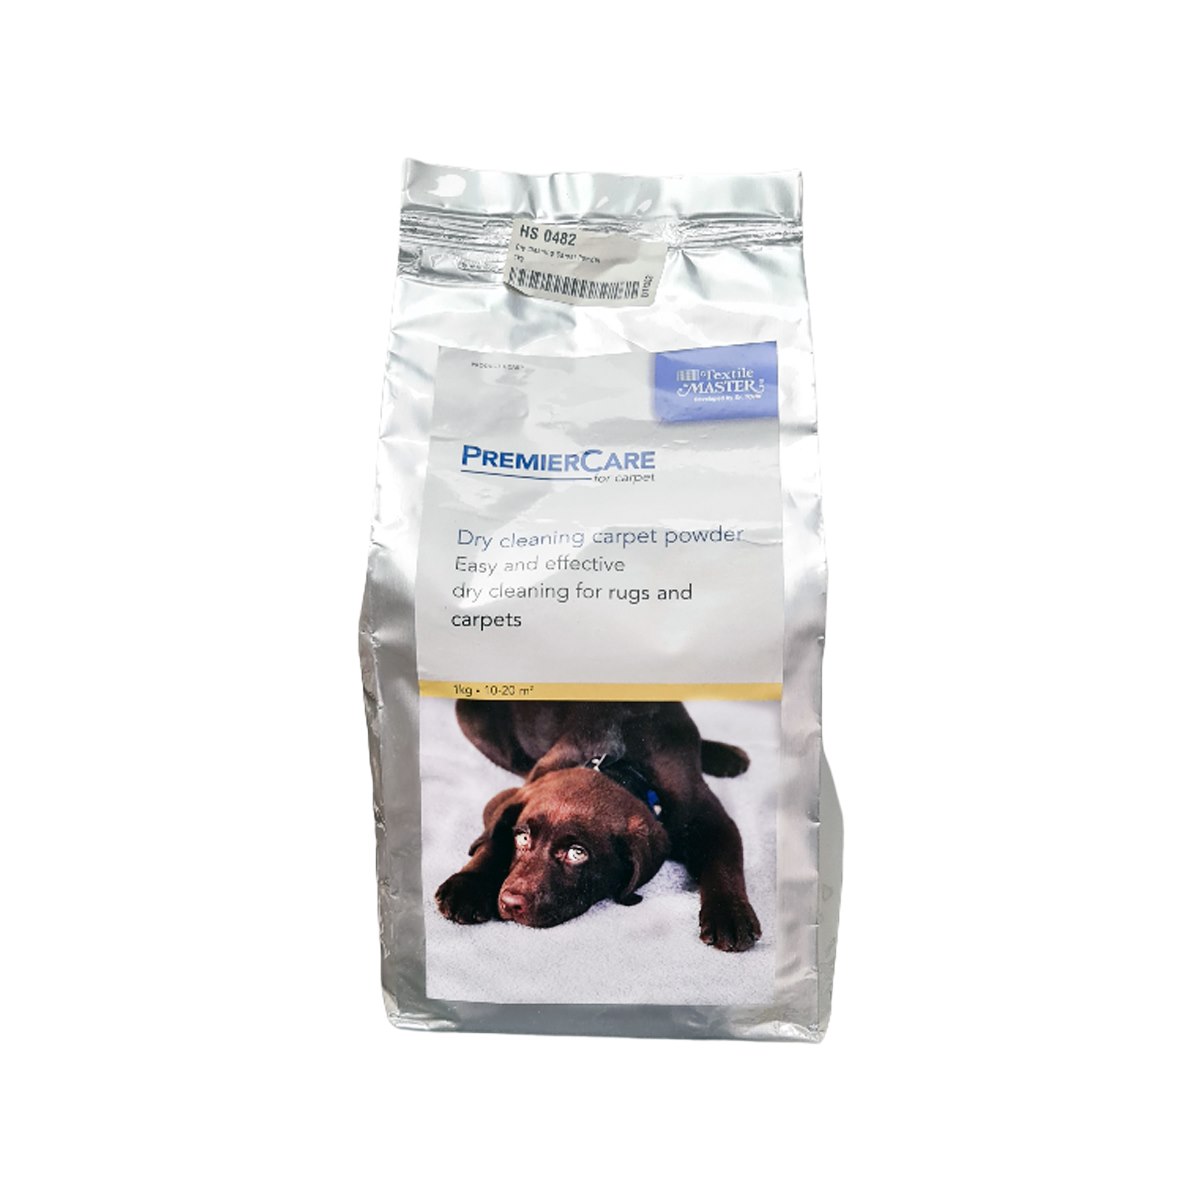 Pure Spa Textile Master Premier Care For Carpet Dry Cleaning Powder 1kg